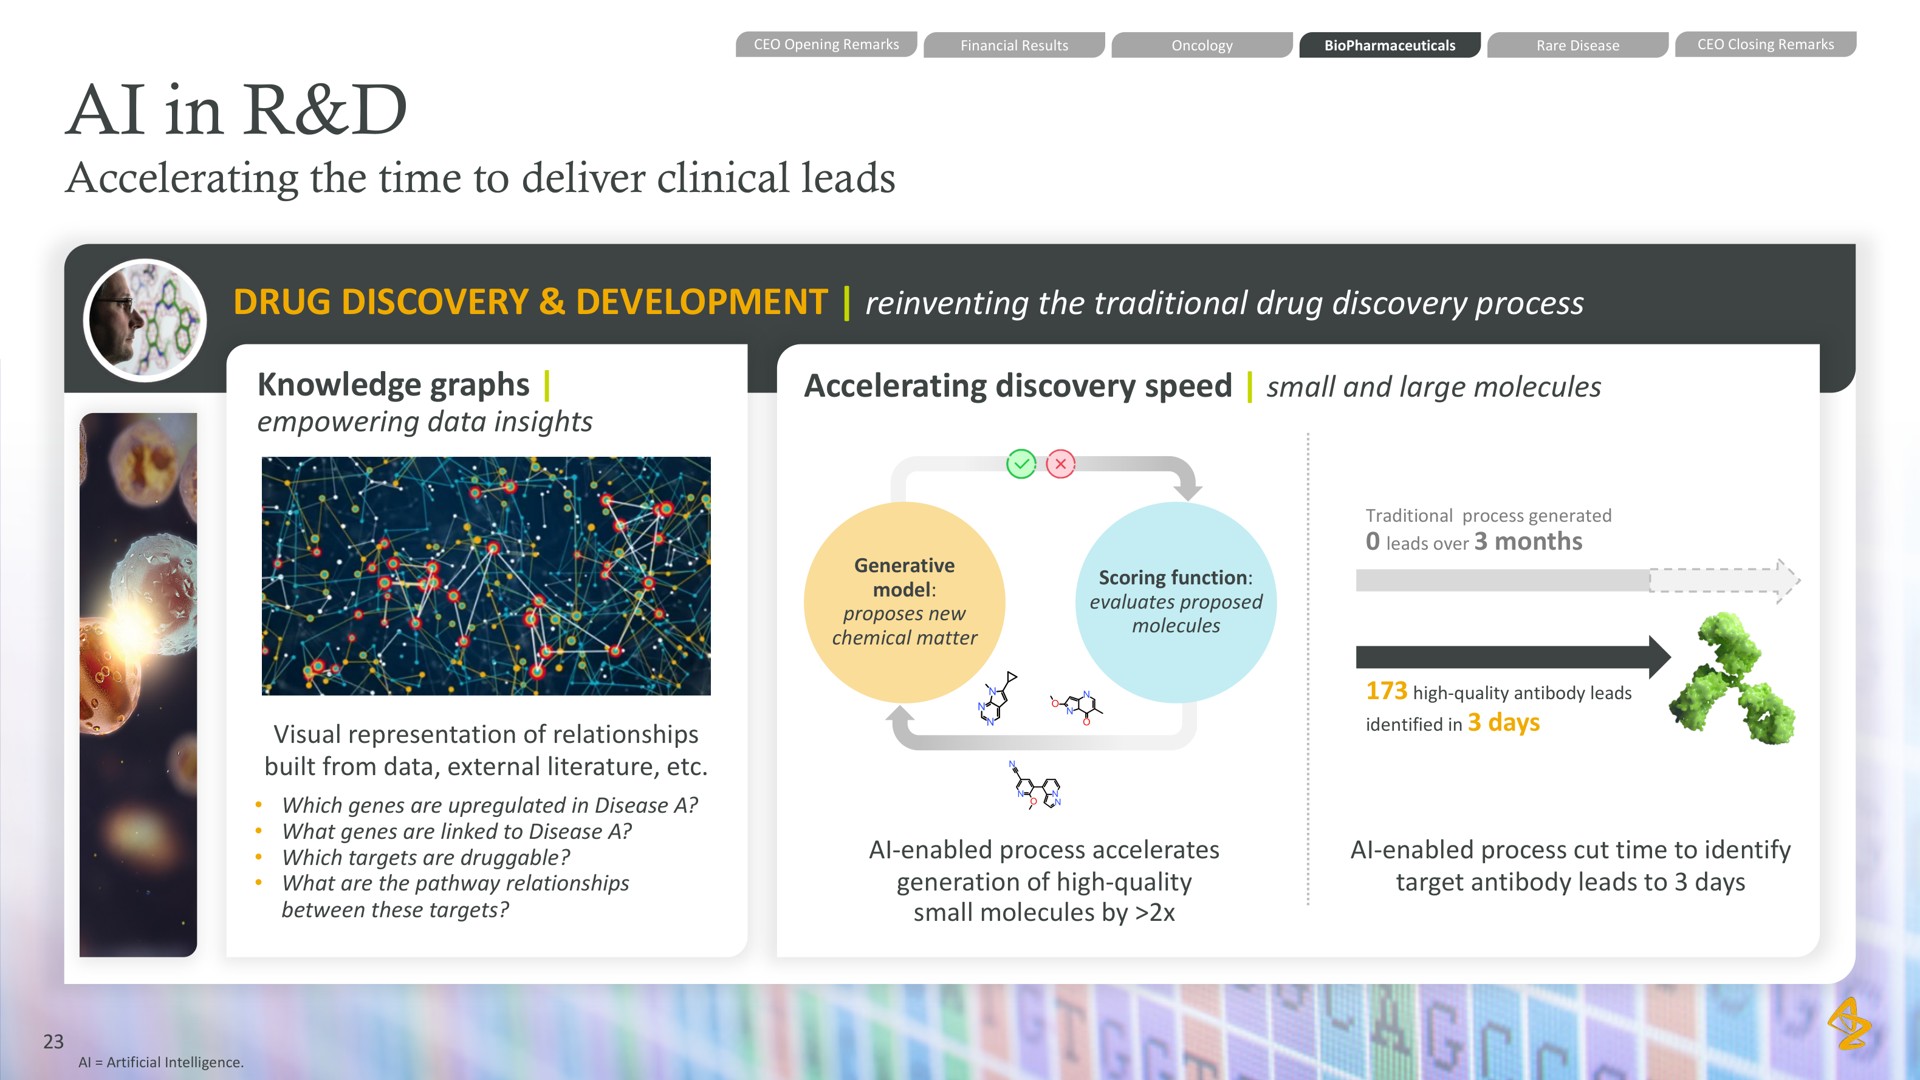 in accelerating the time to deliver clinical leads drug discovery development reinventing the traditional drug discovery process knowledge graphs empowering data insights accelerating discovery speed small and large molecules alin | AstraZeneca